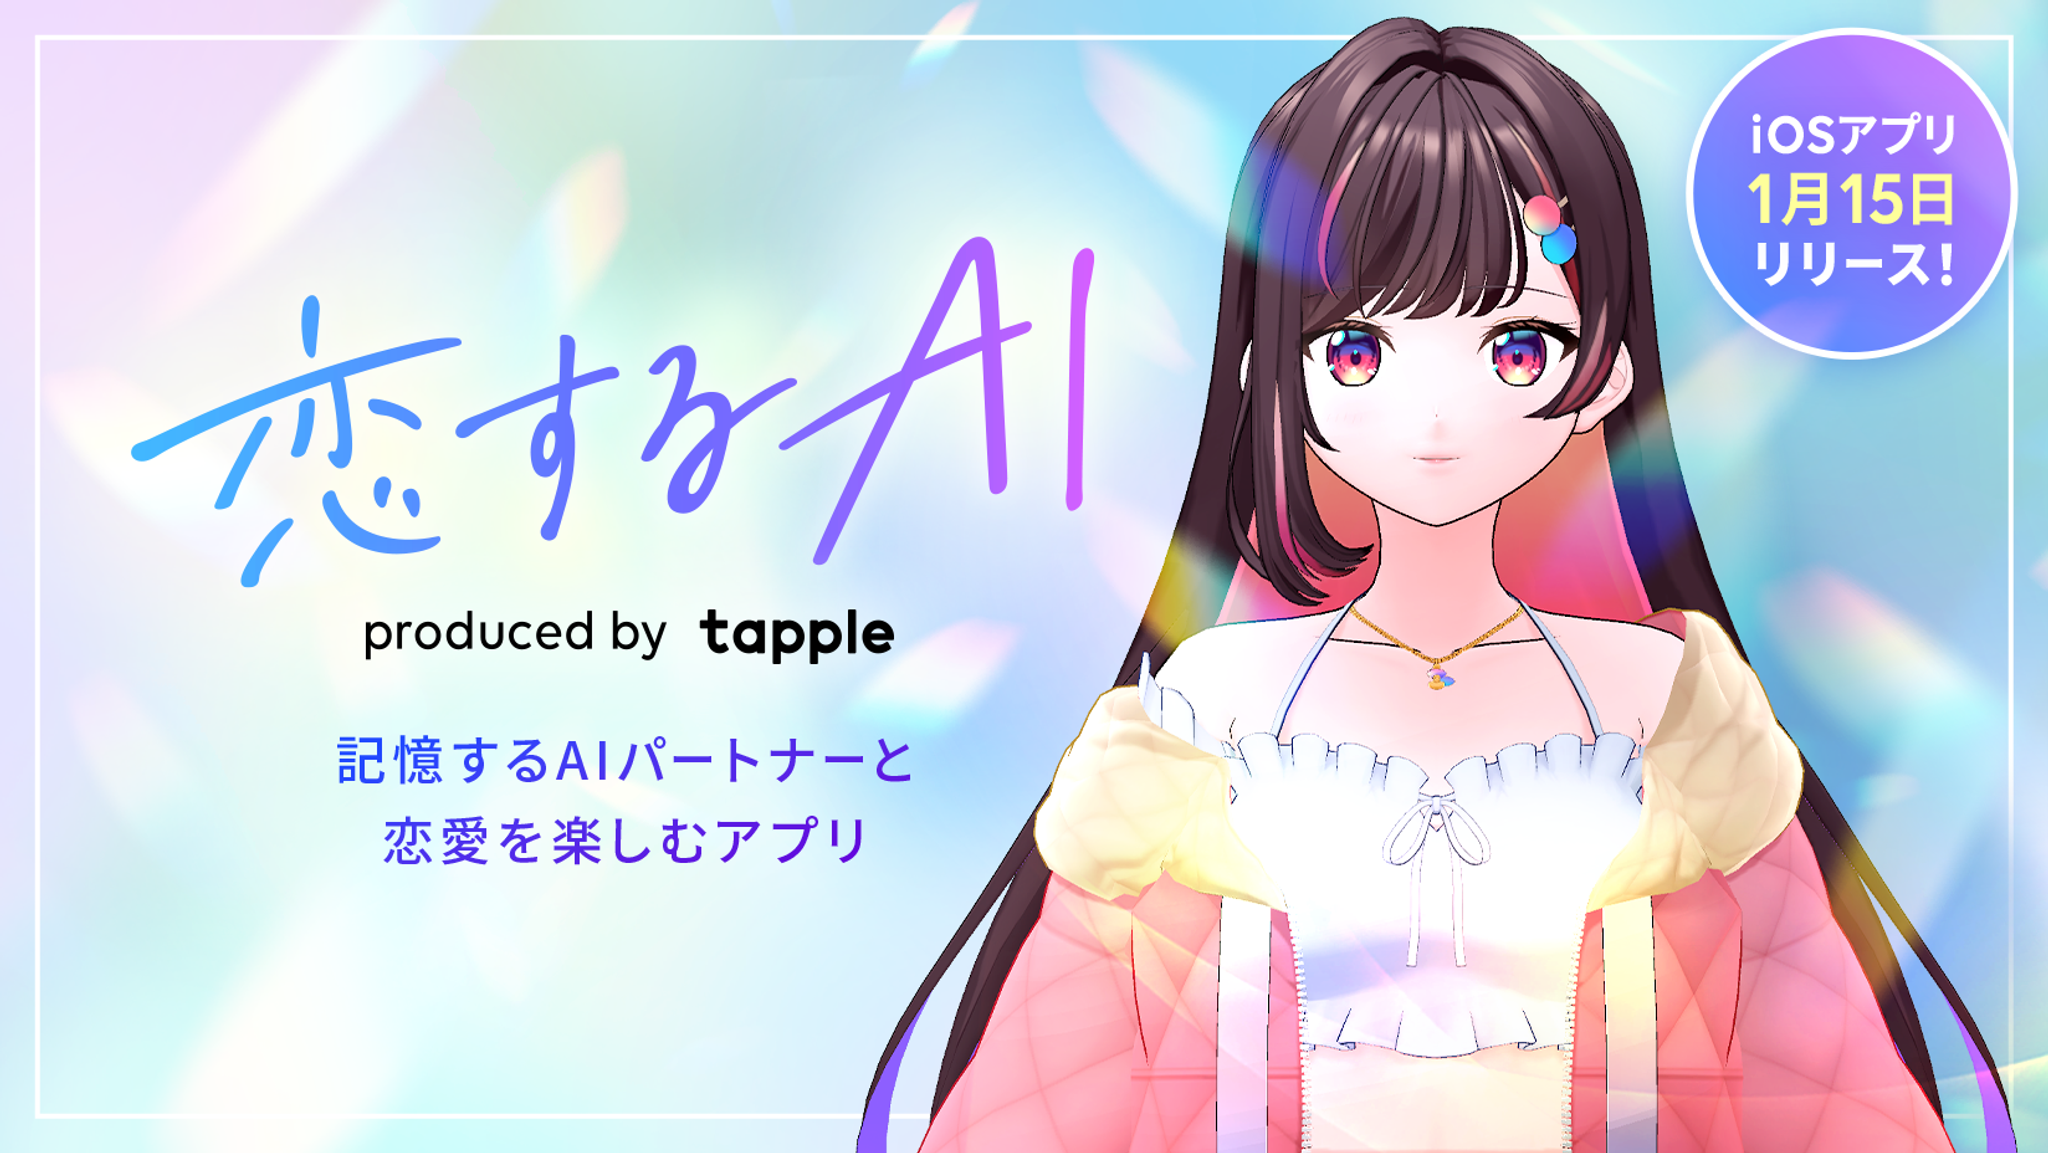 Tapple encourages romance in Japan with AI dating sim